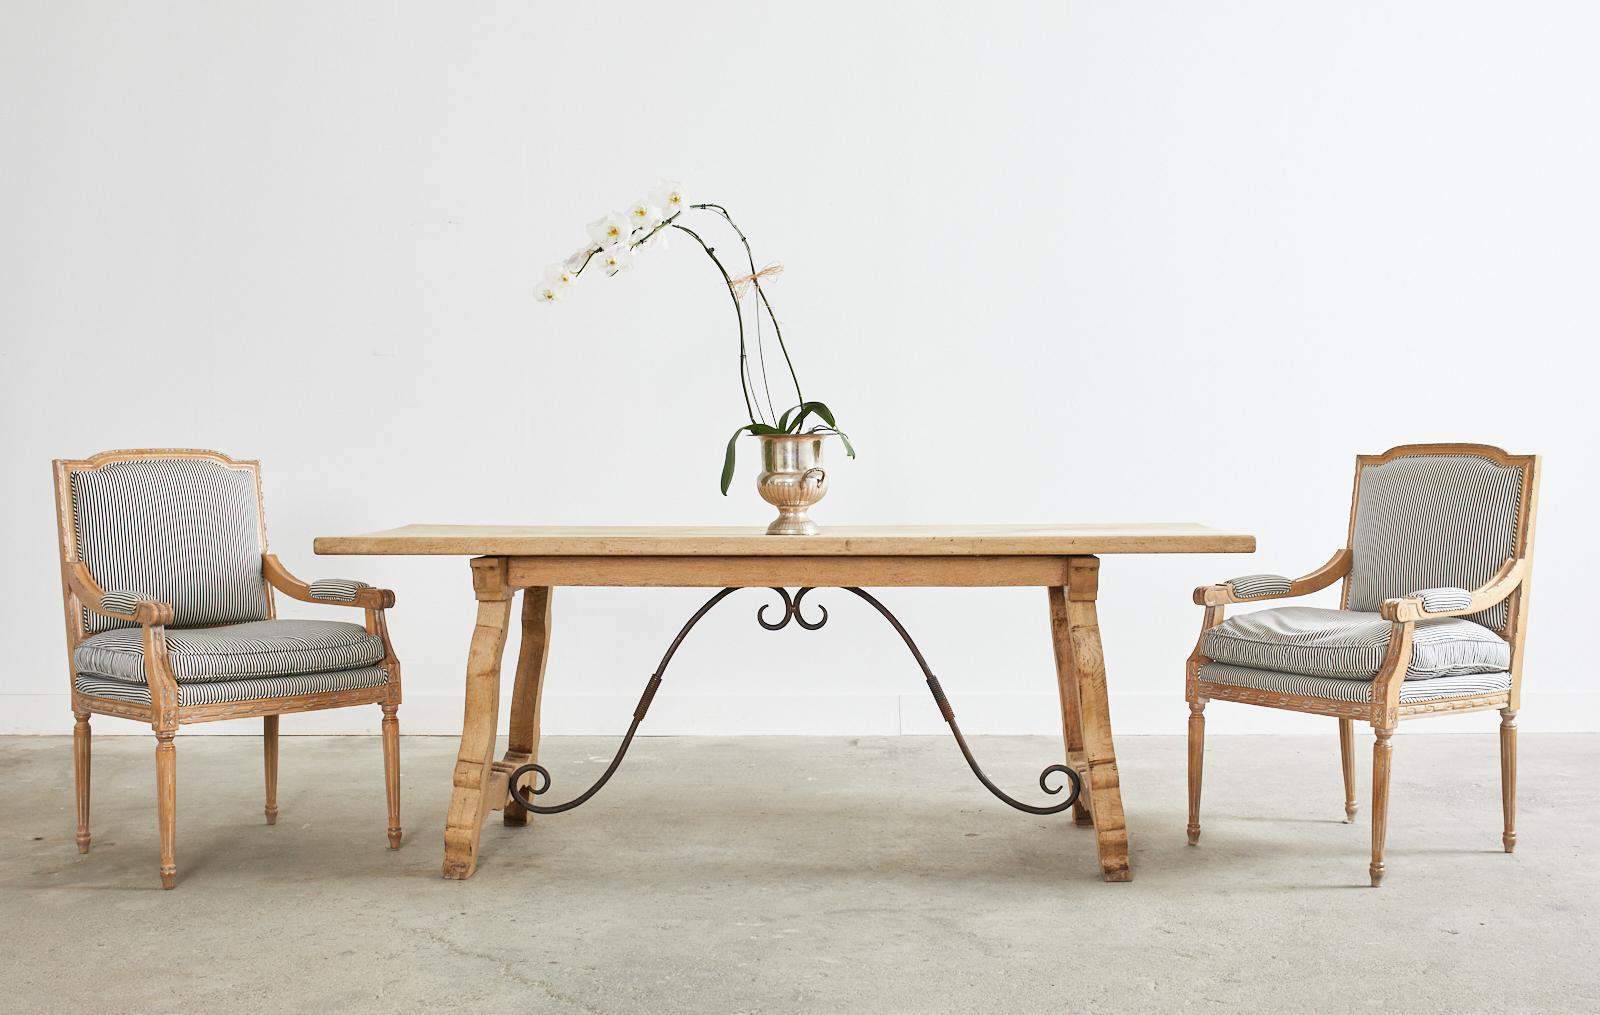 Impressive early 20th century Spanish baroque style library table or dining table crafted from oak. The table features an amazing bleached oak finish that truly brings out the classic design accented by the dark, patinated iron stretchers. The